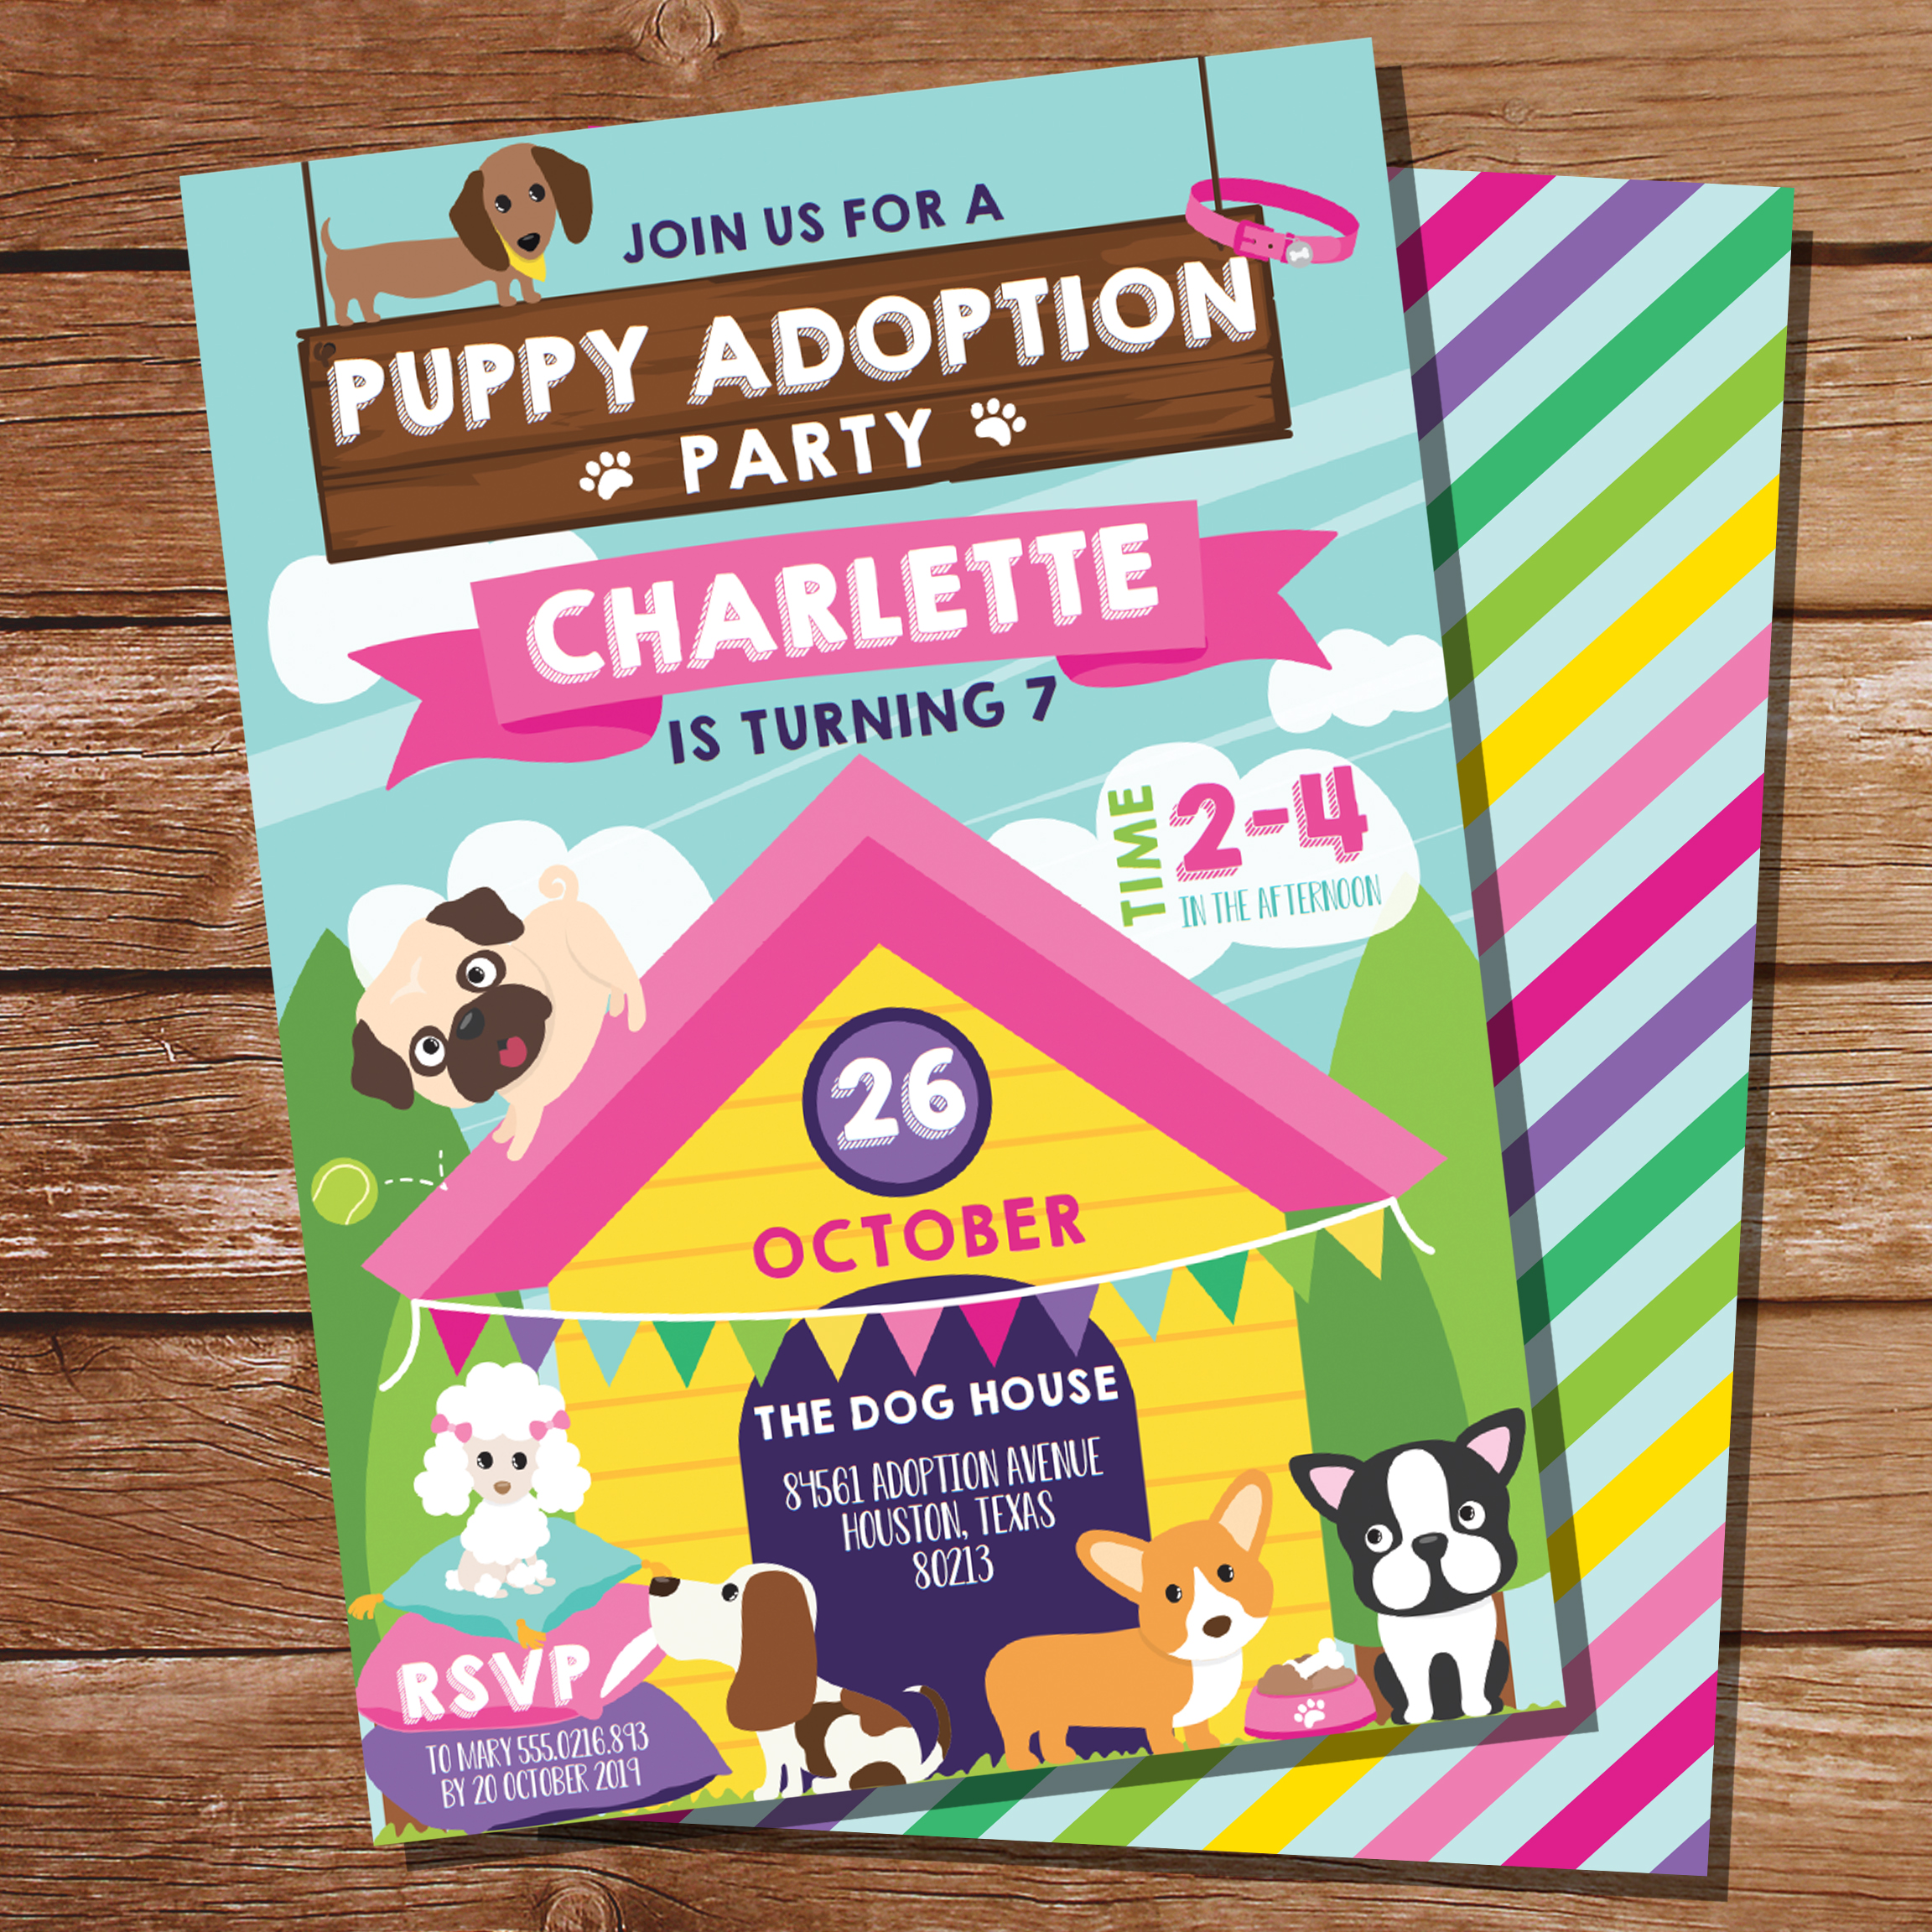 Gorgeous Puppy Adoption Party - Download, edit, print and party!